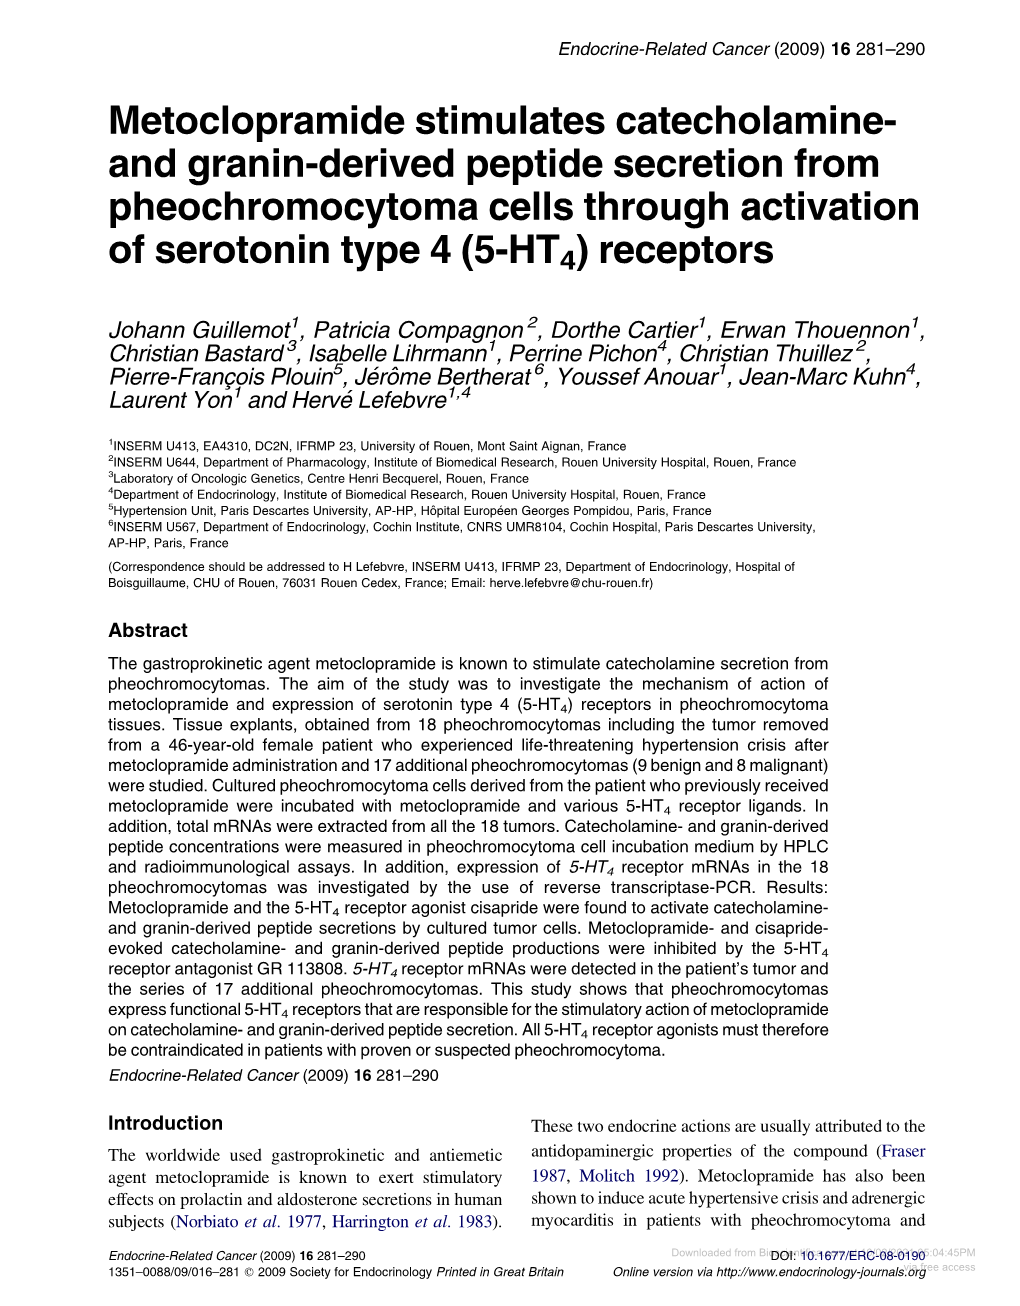 Metoclopramide Stimulates Catecholamine- and Granin-Derived Peptide Secretion from Pheochromocytoma Cells Through Activation of Serotonin Type 4 (5-HT4) Receptors